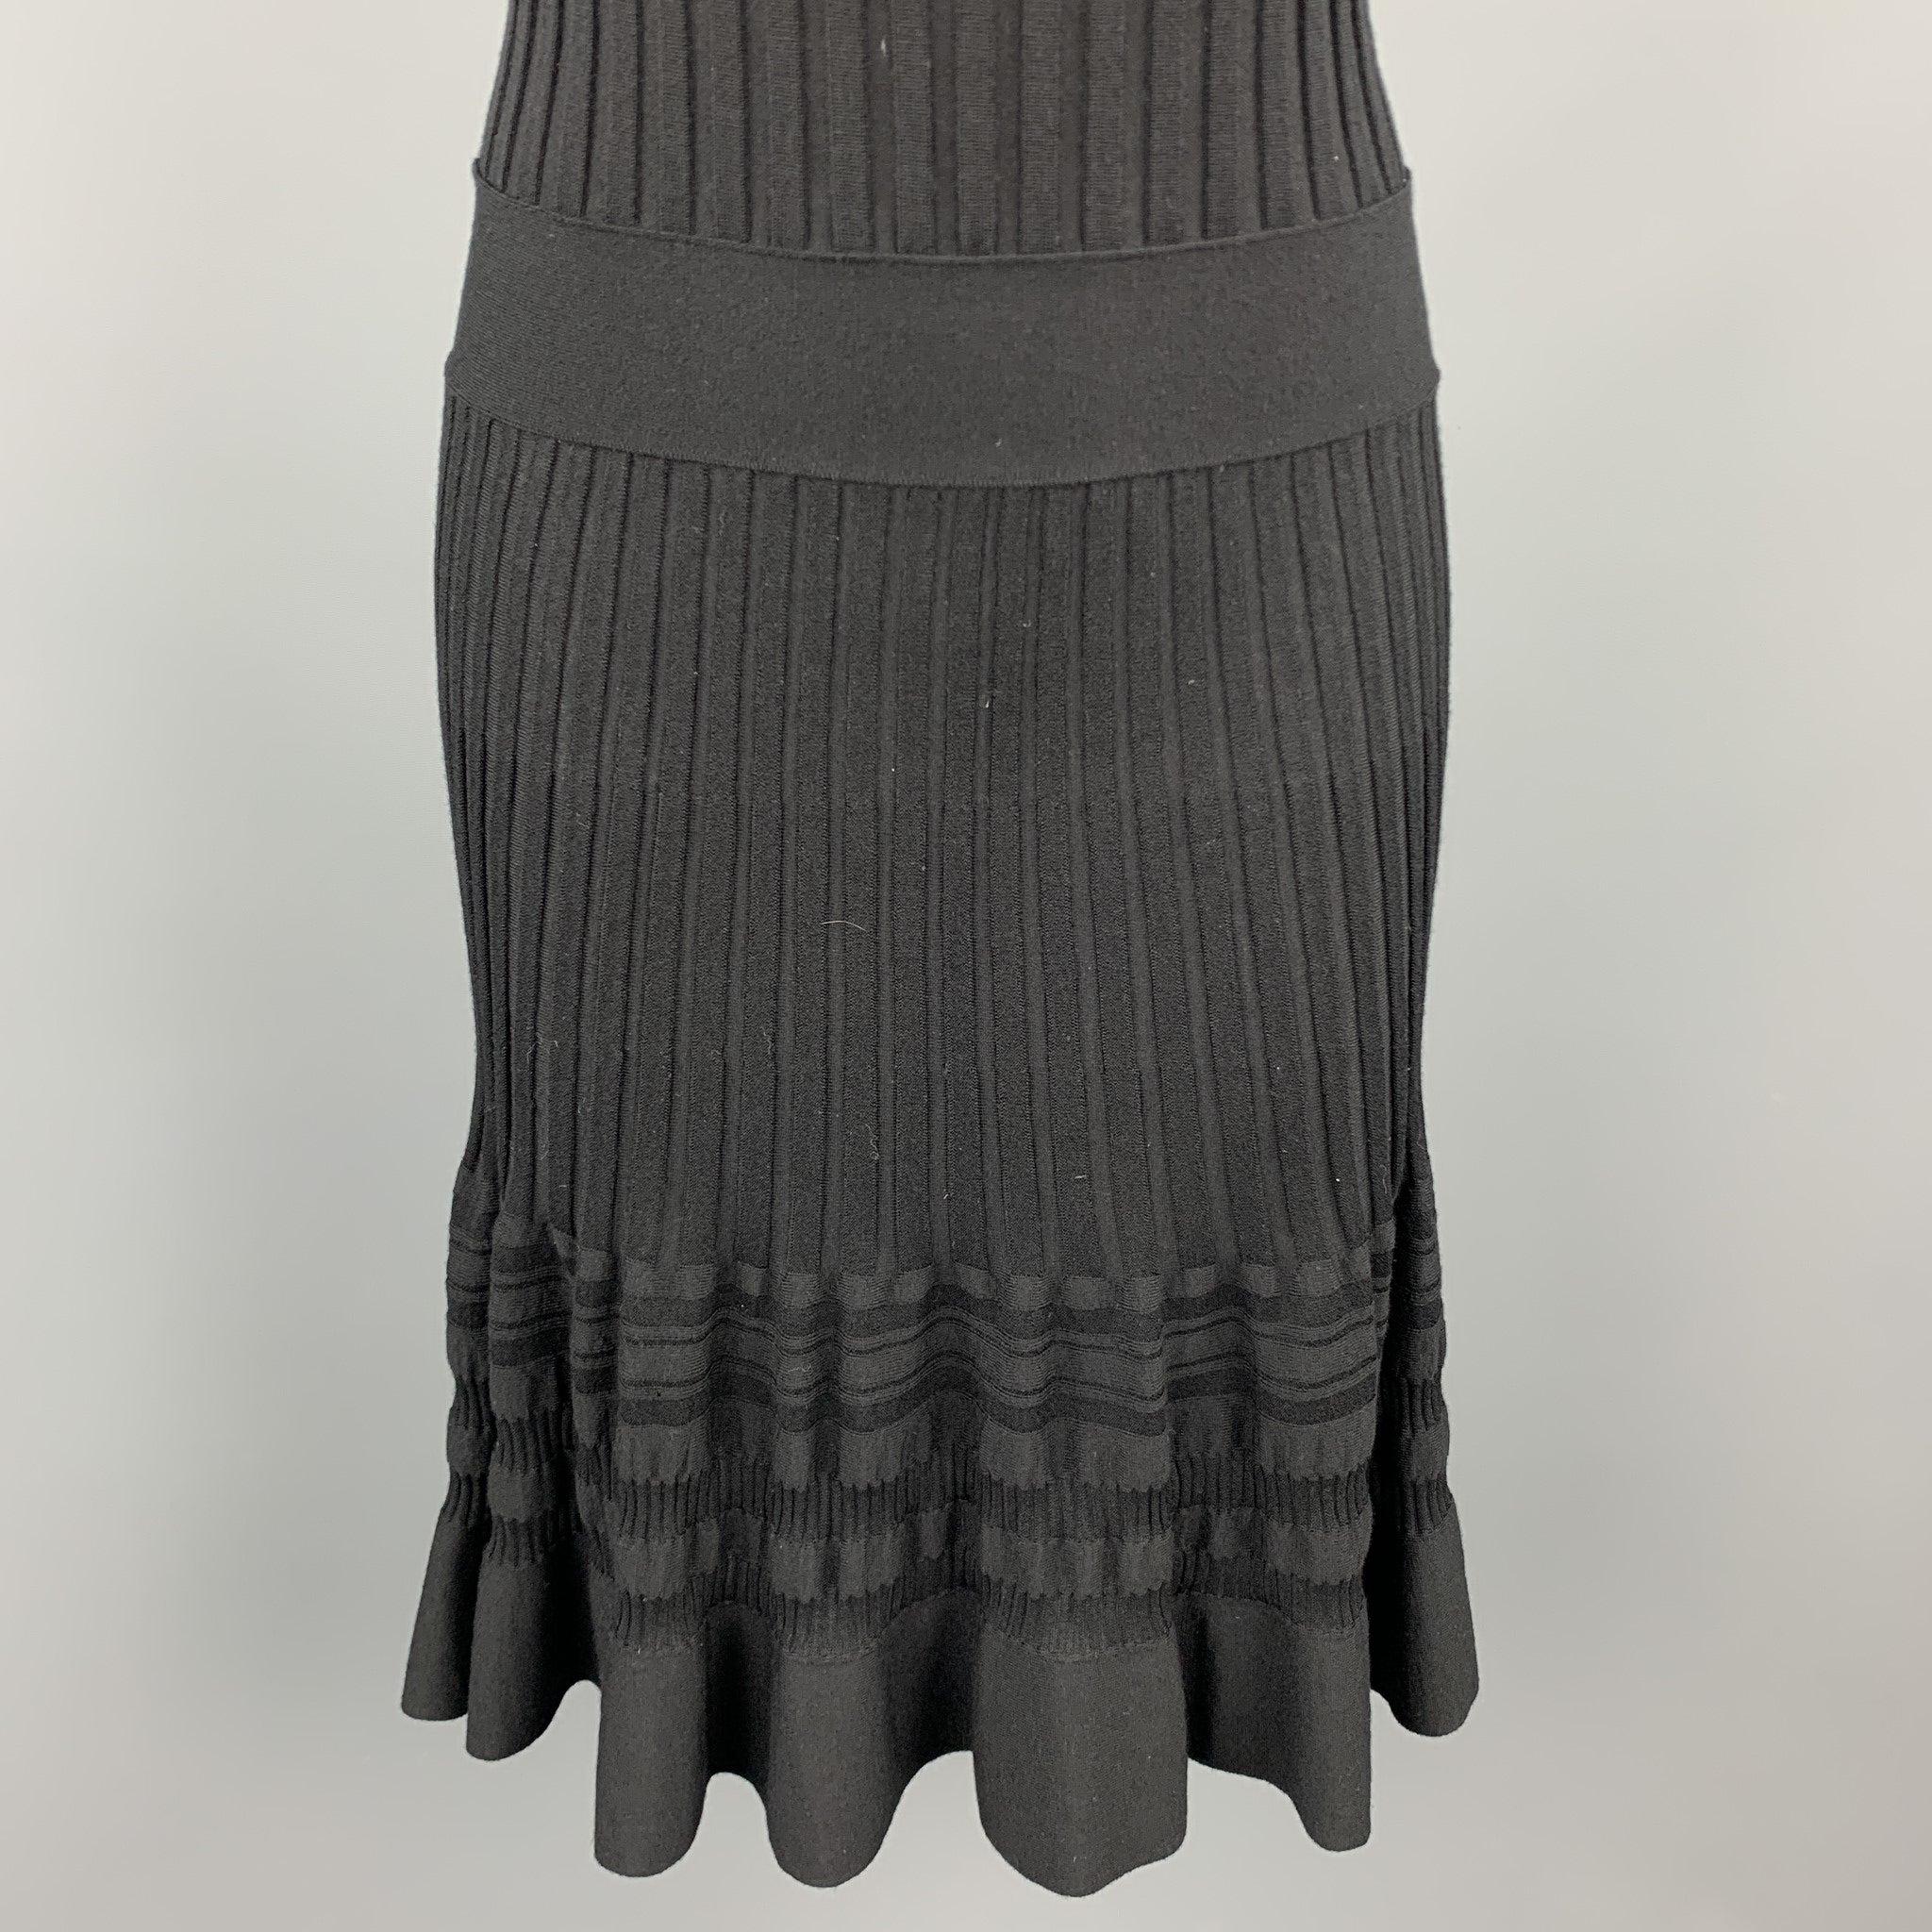 EMILIO PUCCI Size L Black Ribbed Knit Virgin Wool Sleeveless Dress In Good Condition For Sale In San Francisco, CA